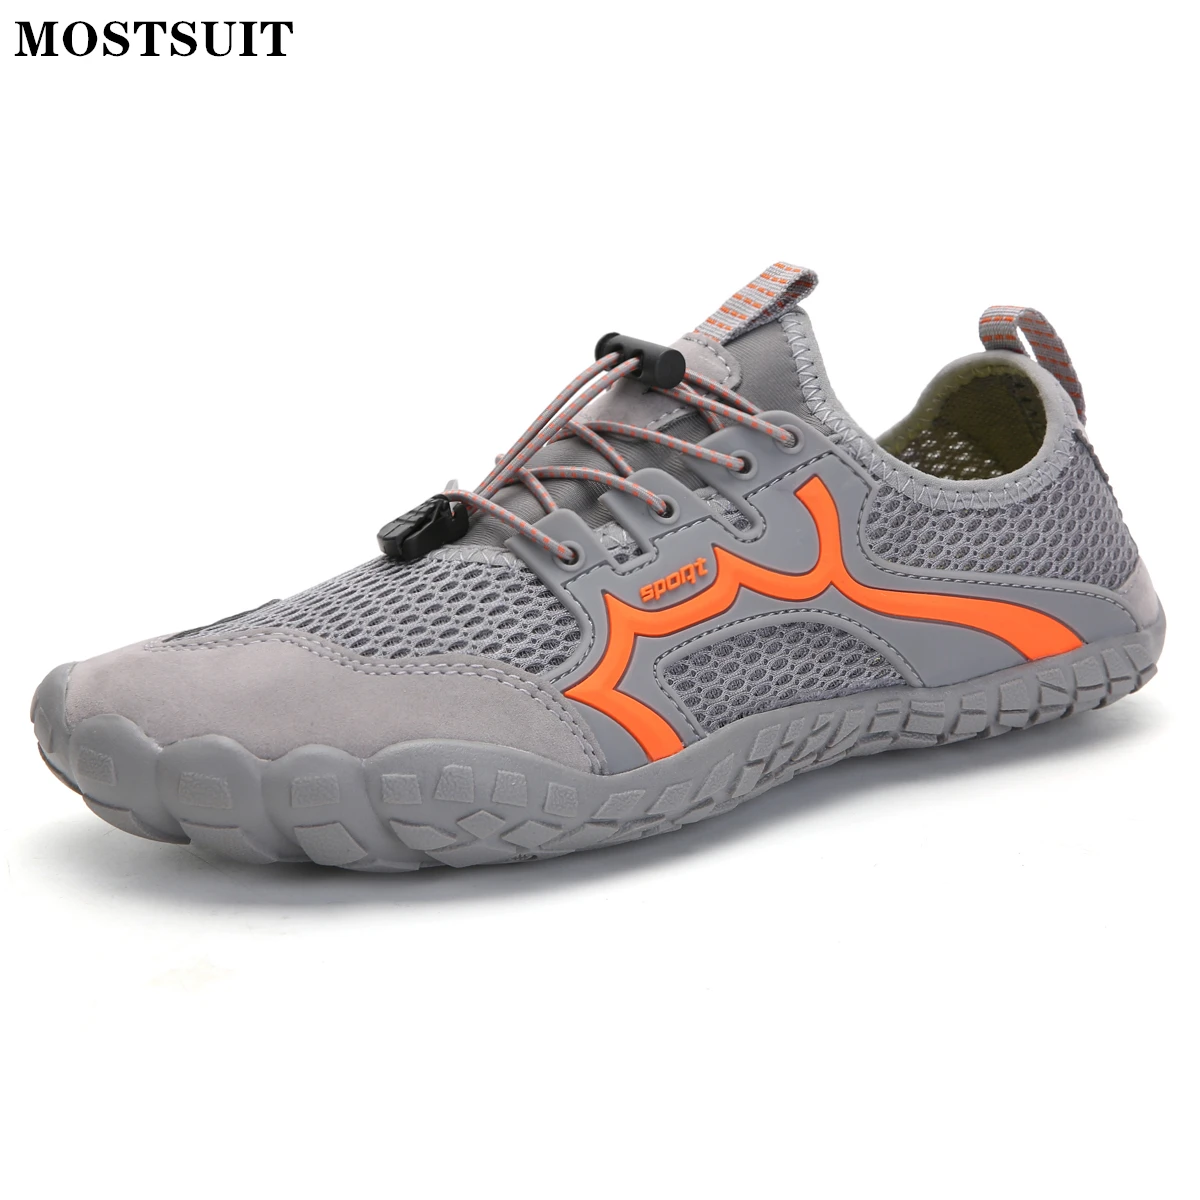 

Men Water Shoes Women Aqua Shoes Bearfoot Quick-Dry Outdoor Athletic Sport Shoes For Hiking Kayaking Boating Surfing Walking